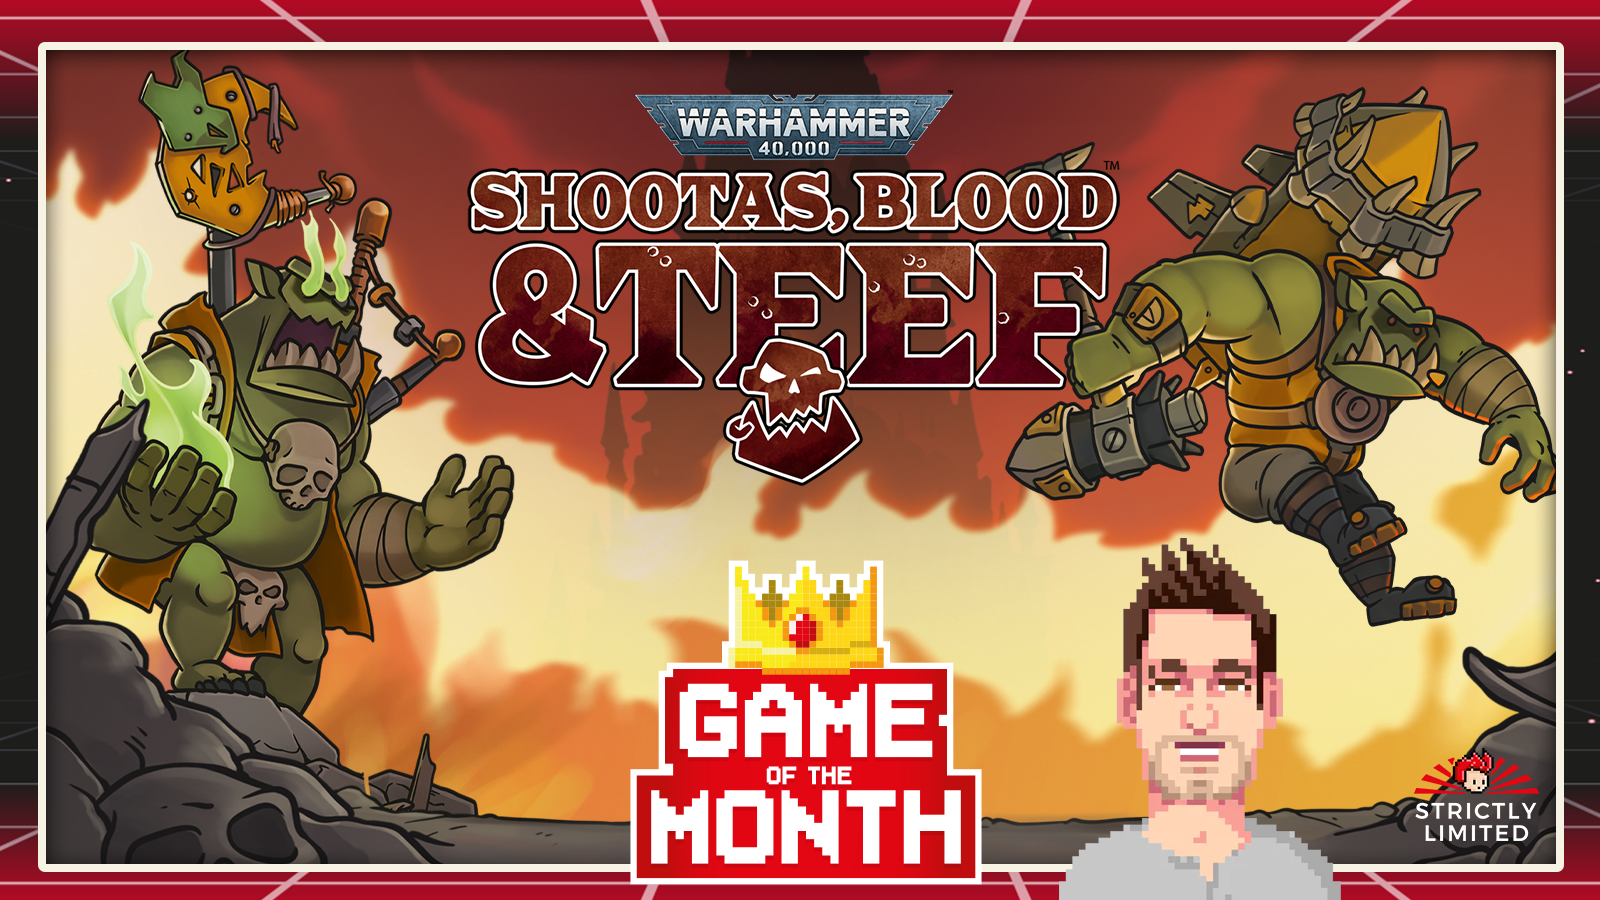 Game of the Month: Warhammer 40,000: Shootas, Blood & Teef